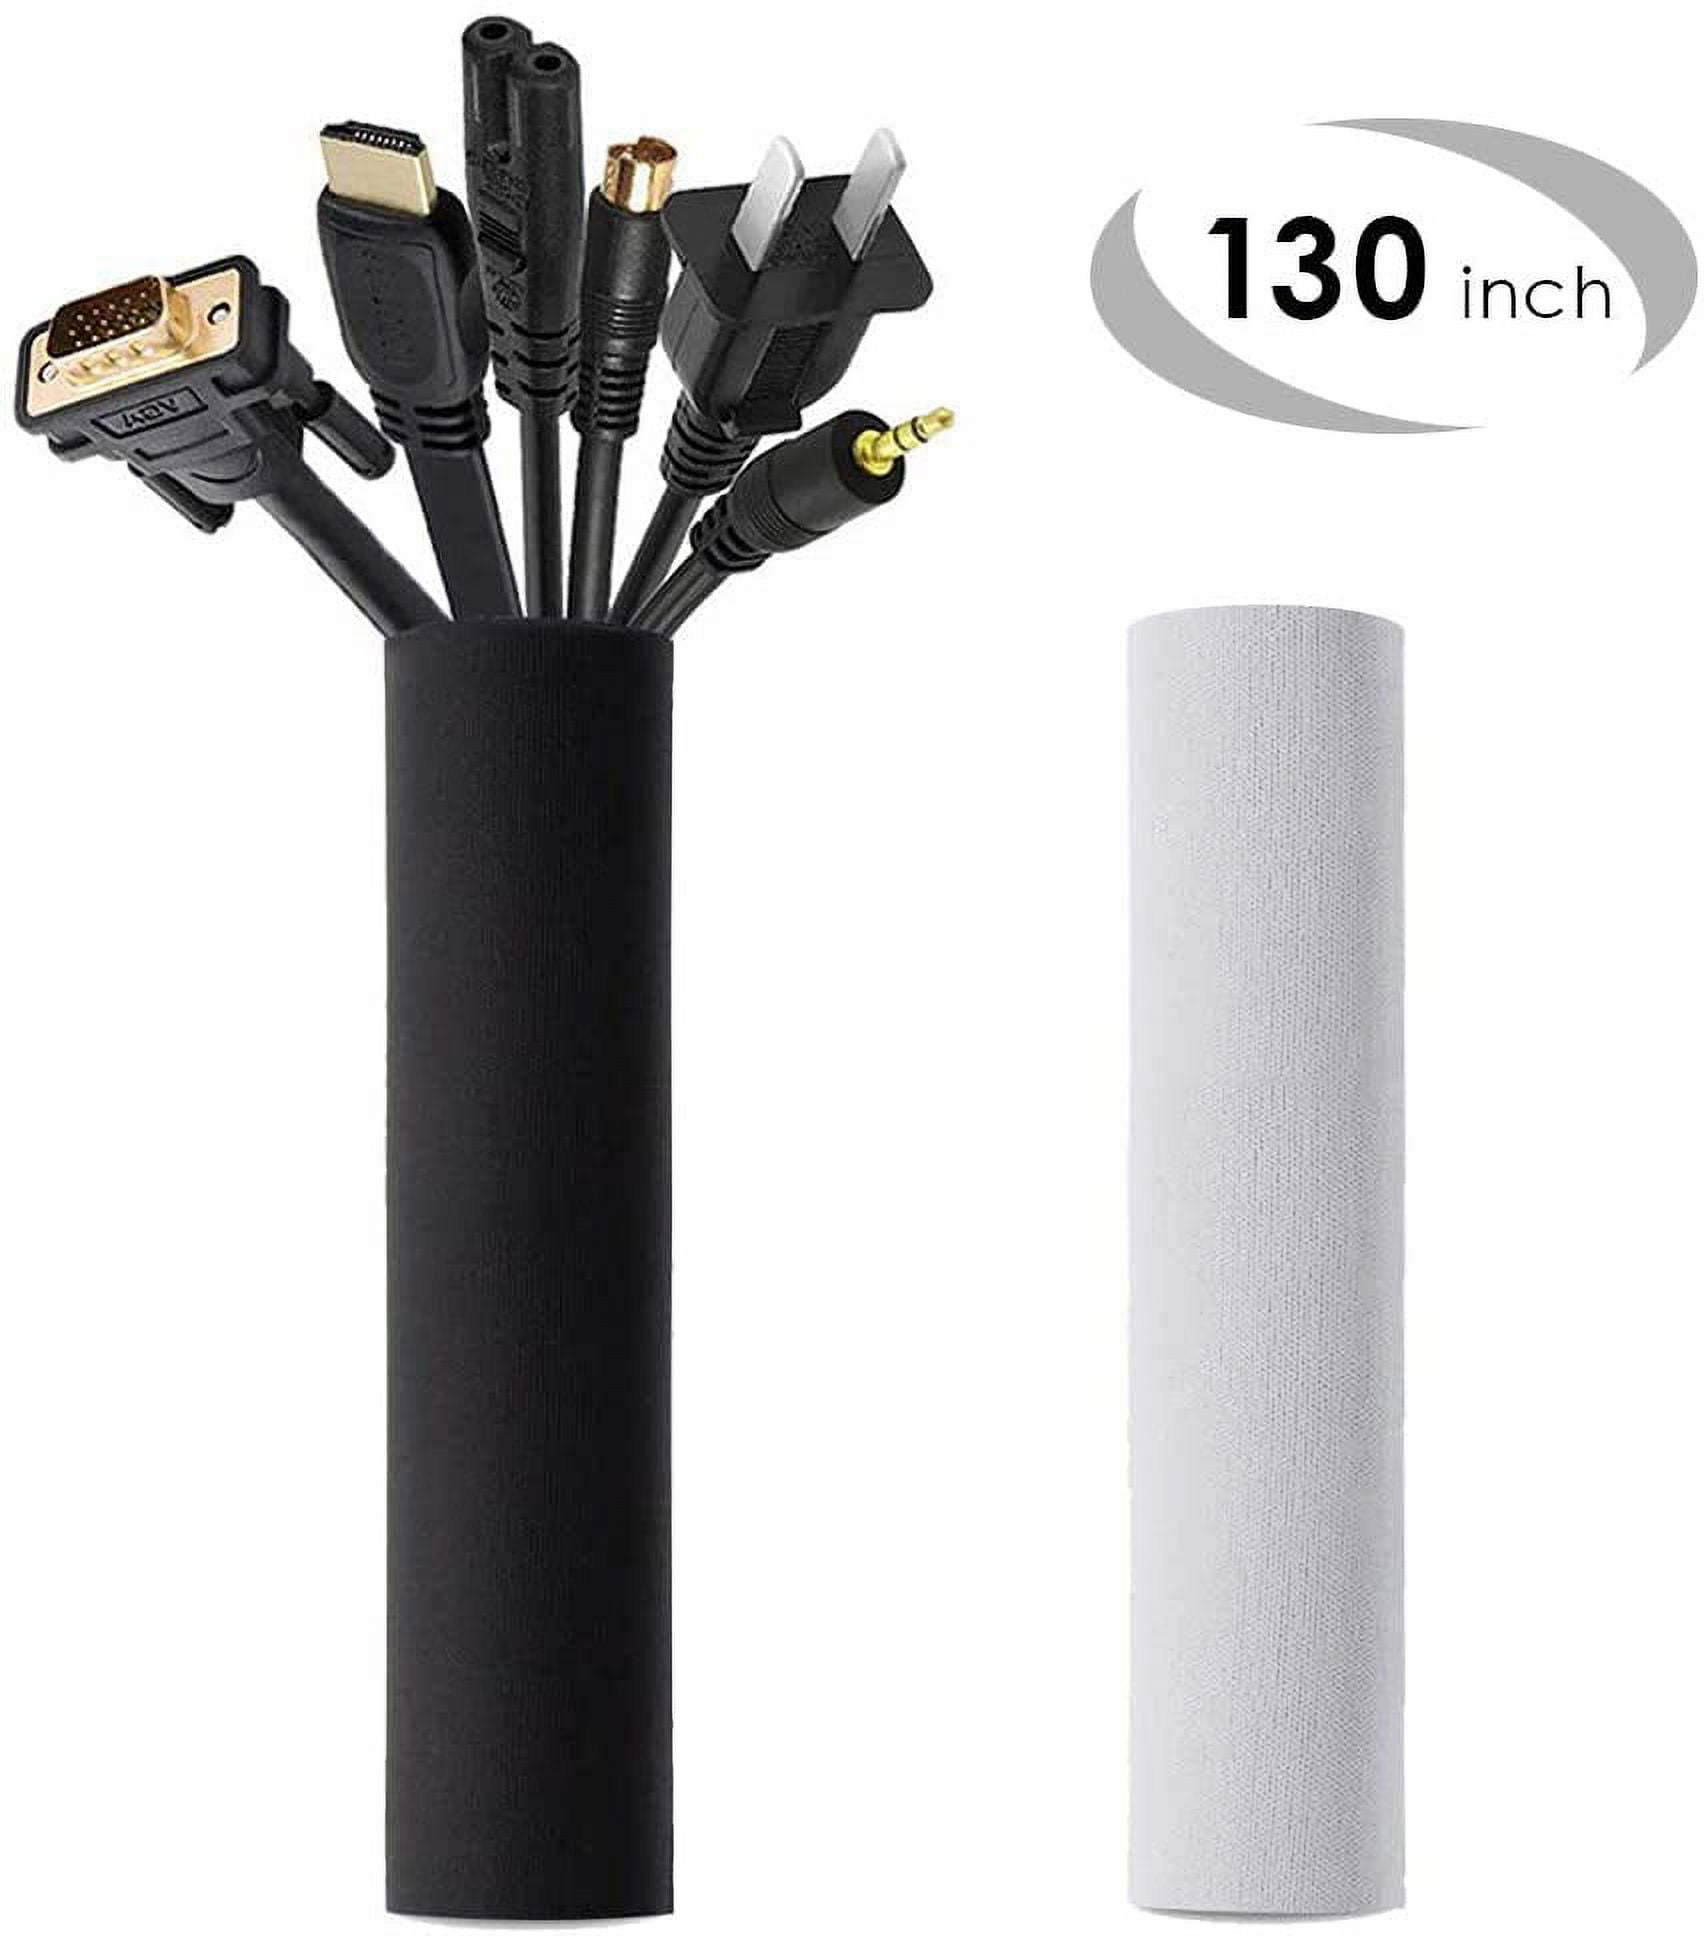 Cable Management Sleeve, Cable Organizer Sleeve, Wire Sleeve Wrap Cover for  TV & Computer & Home & Office, 130 Inch, DIY Customization 